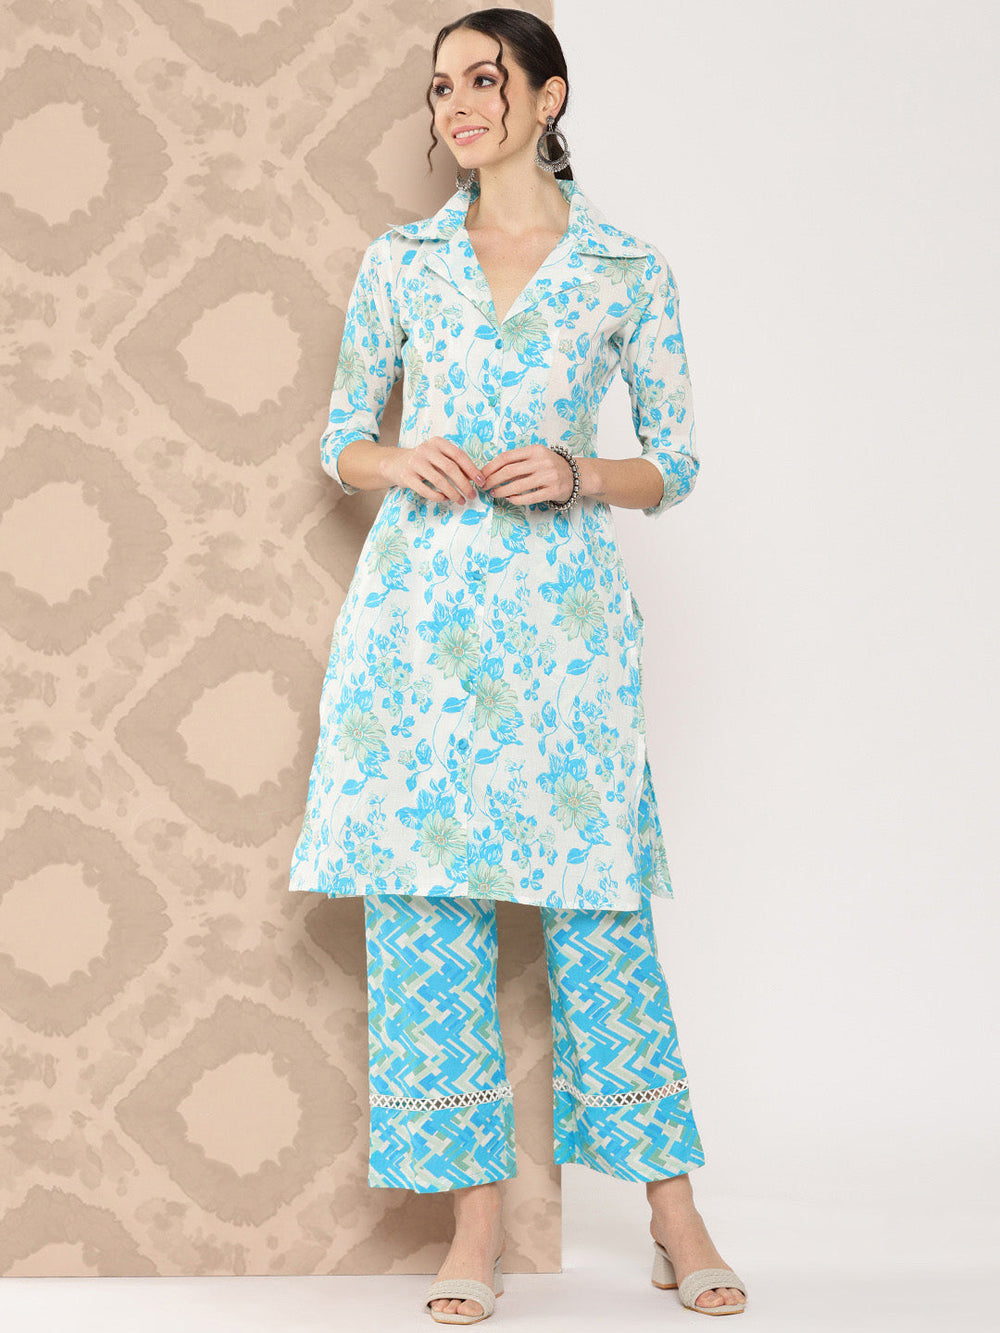 White and blue Floral Printed Pure Cotton Kurta with Trousers-Yufta Store-1463CRDWHS